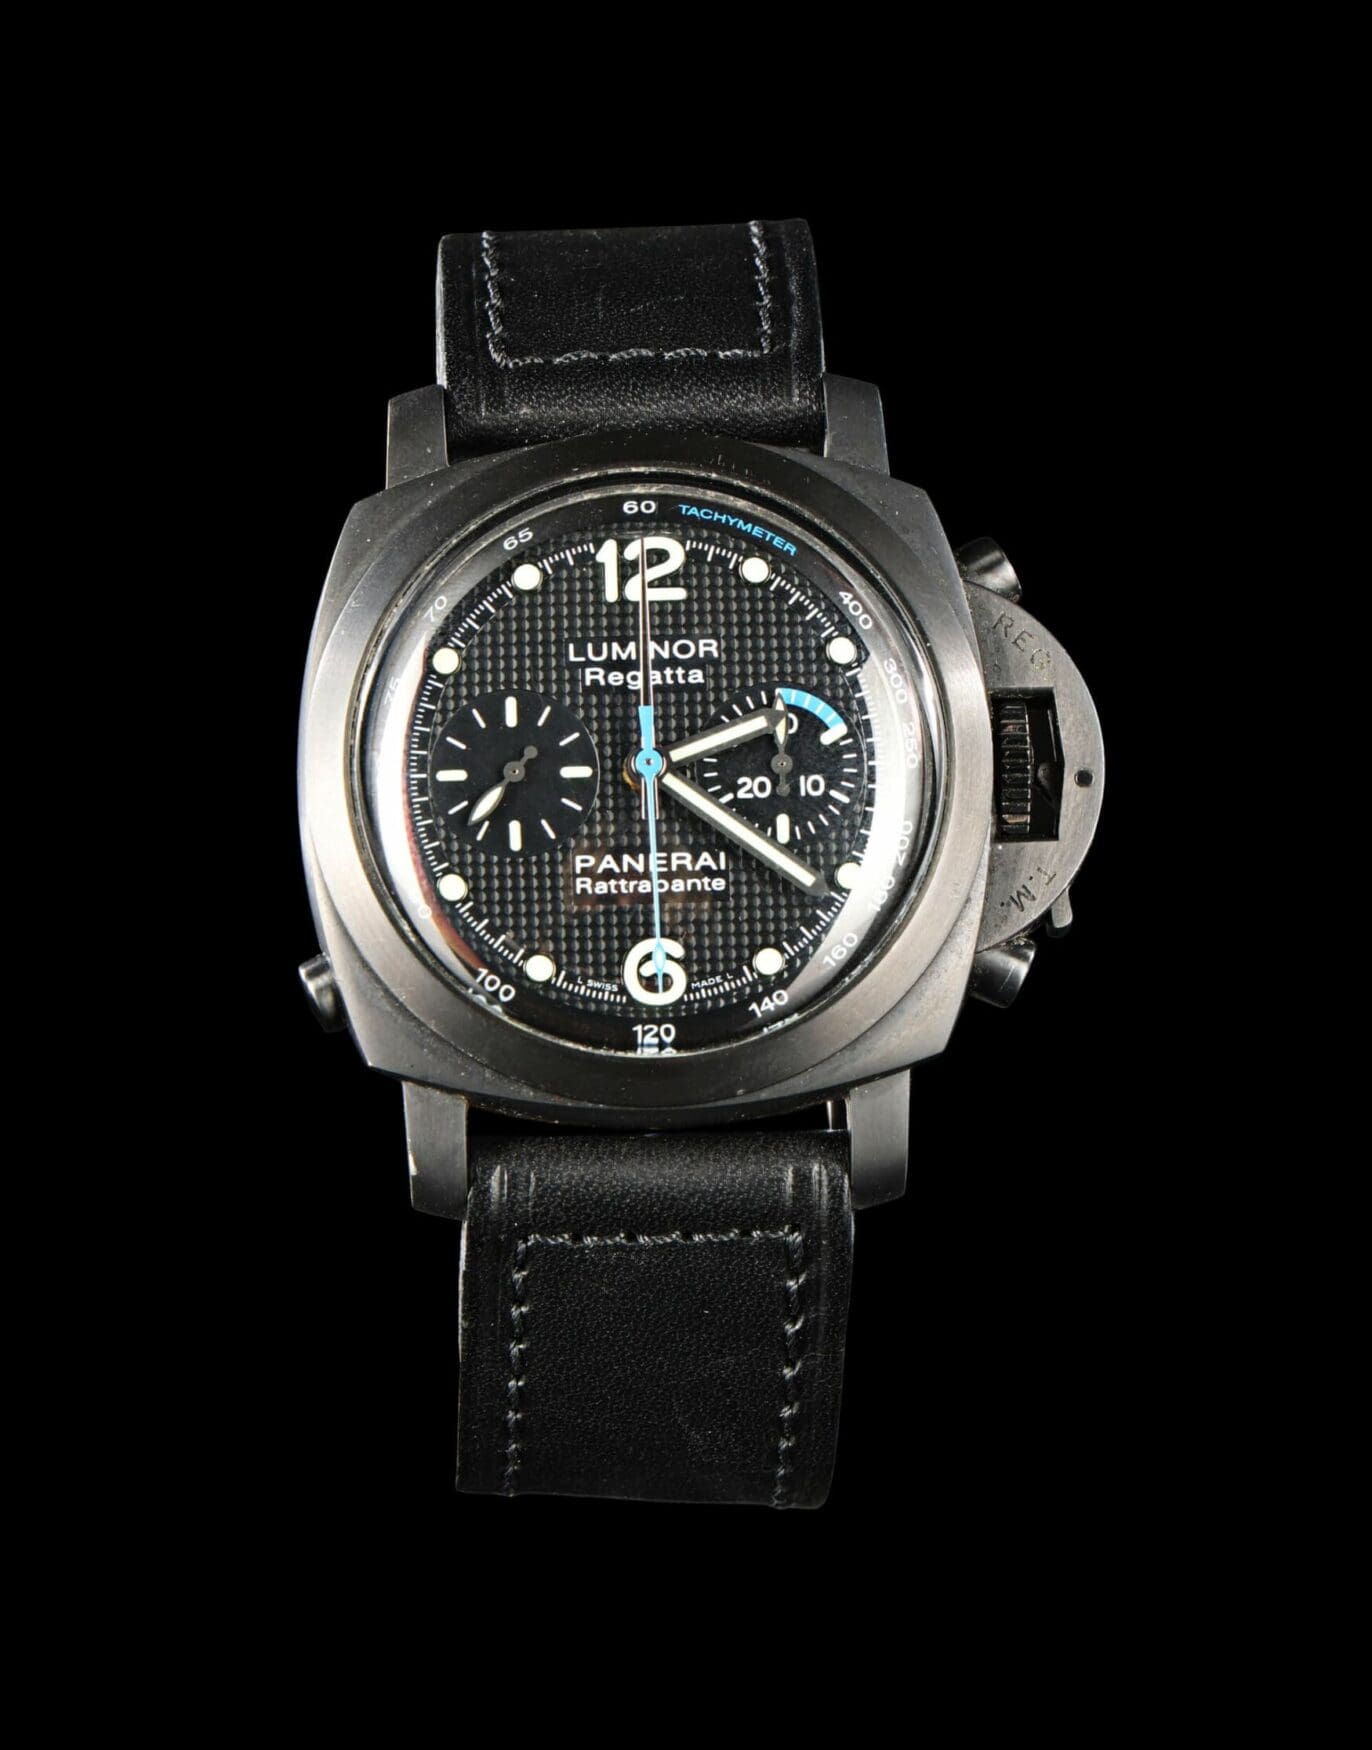 Sylvester Stallone Panerai The Expendables Auction